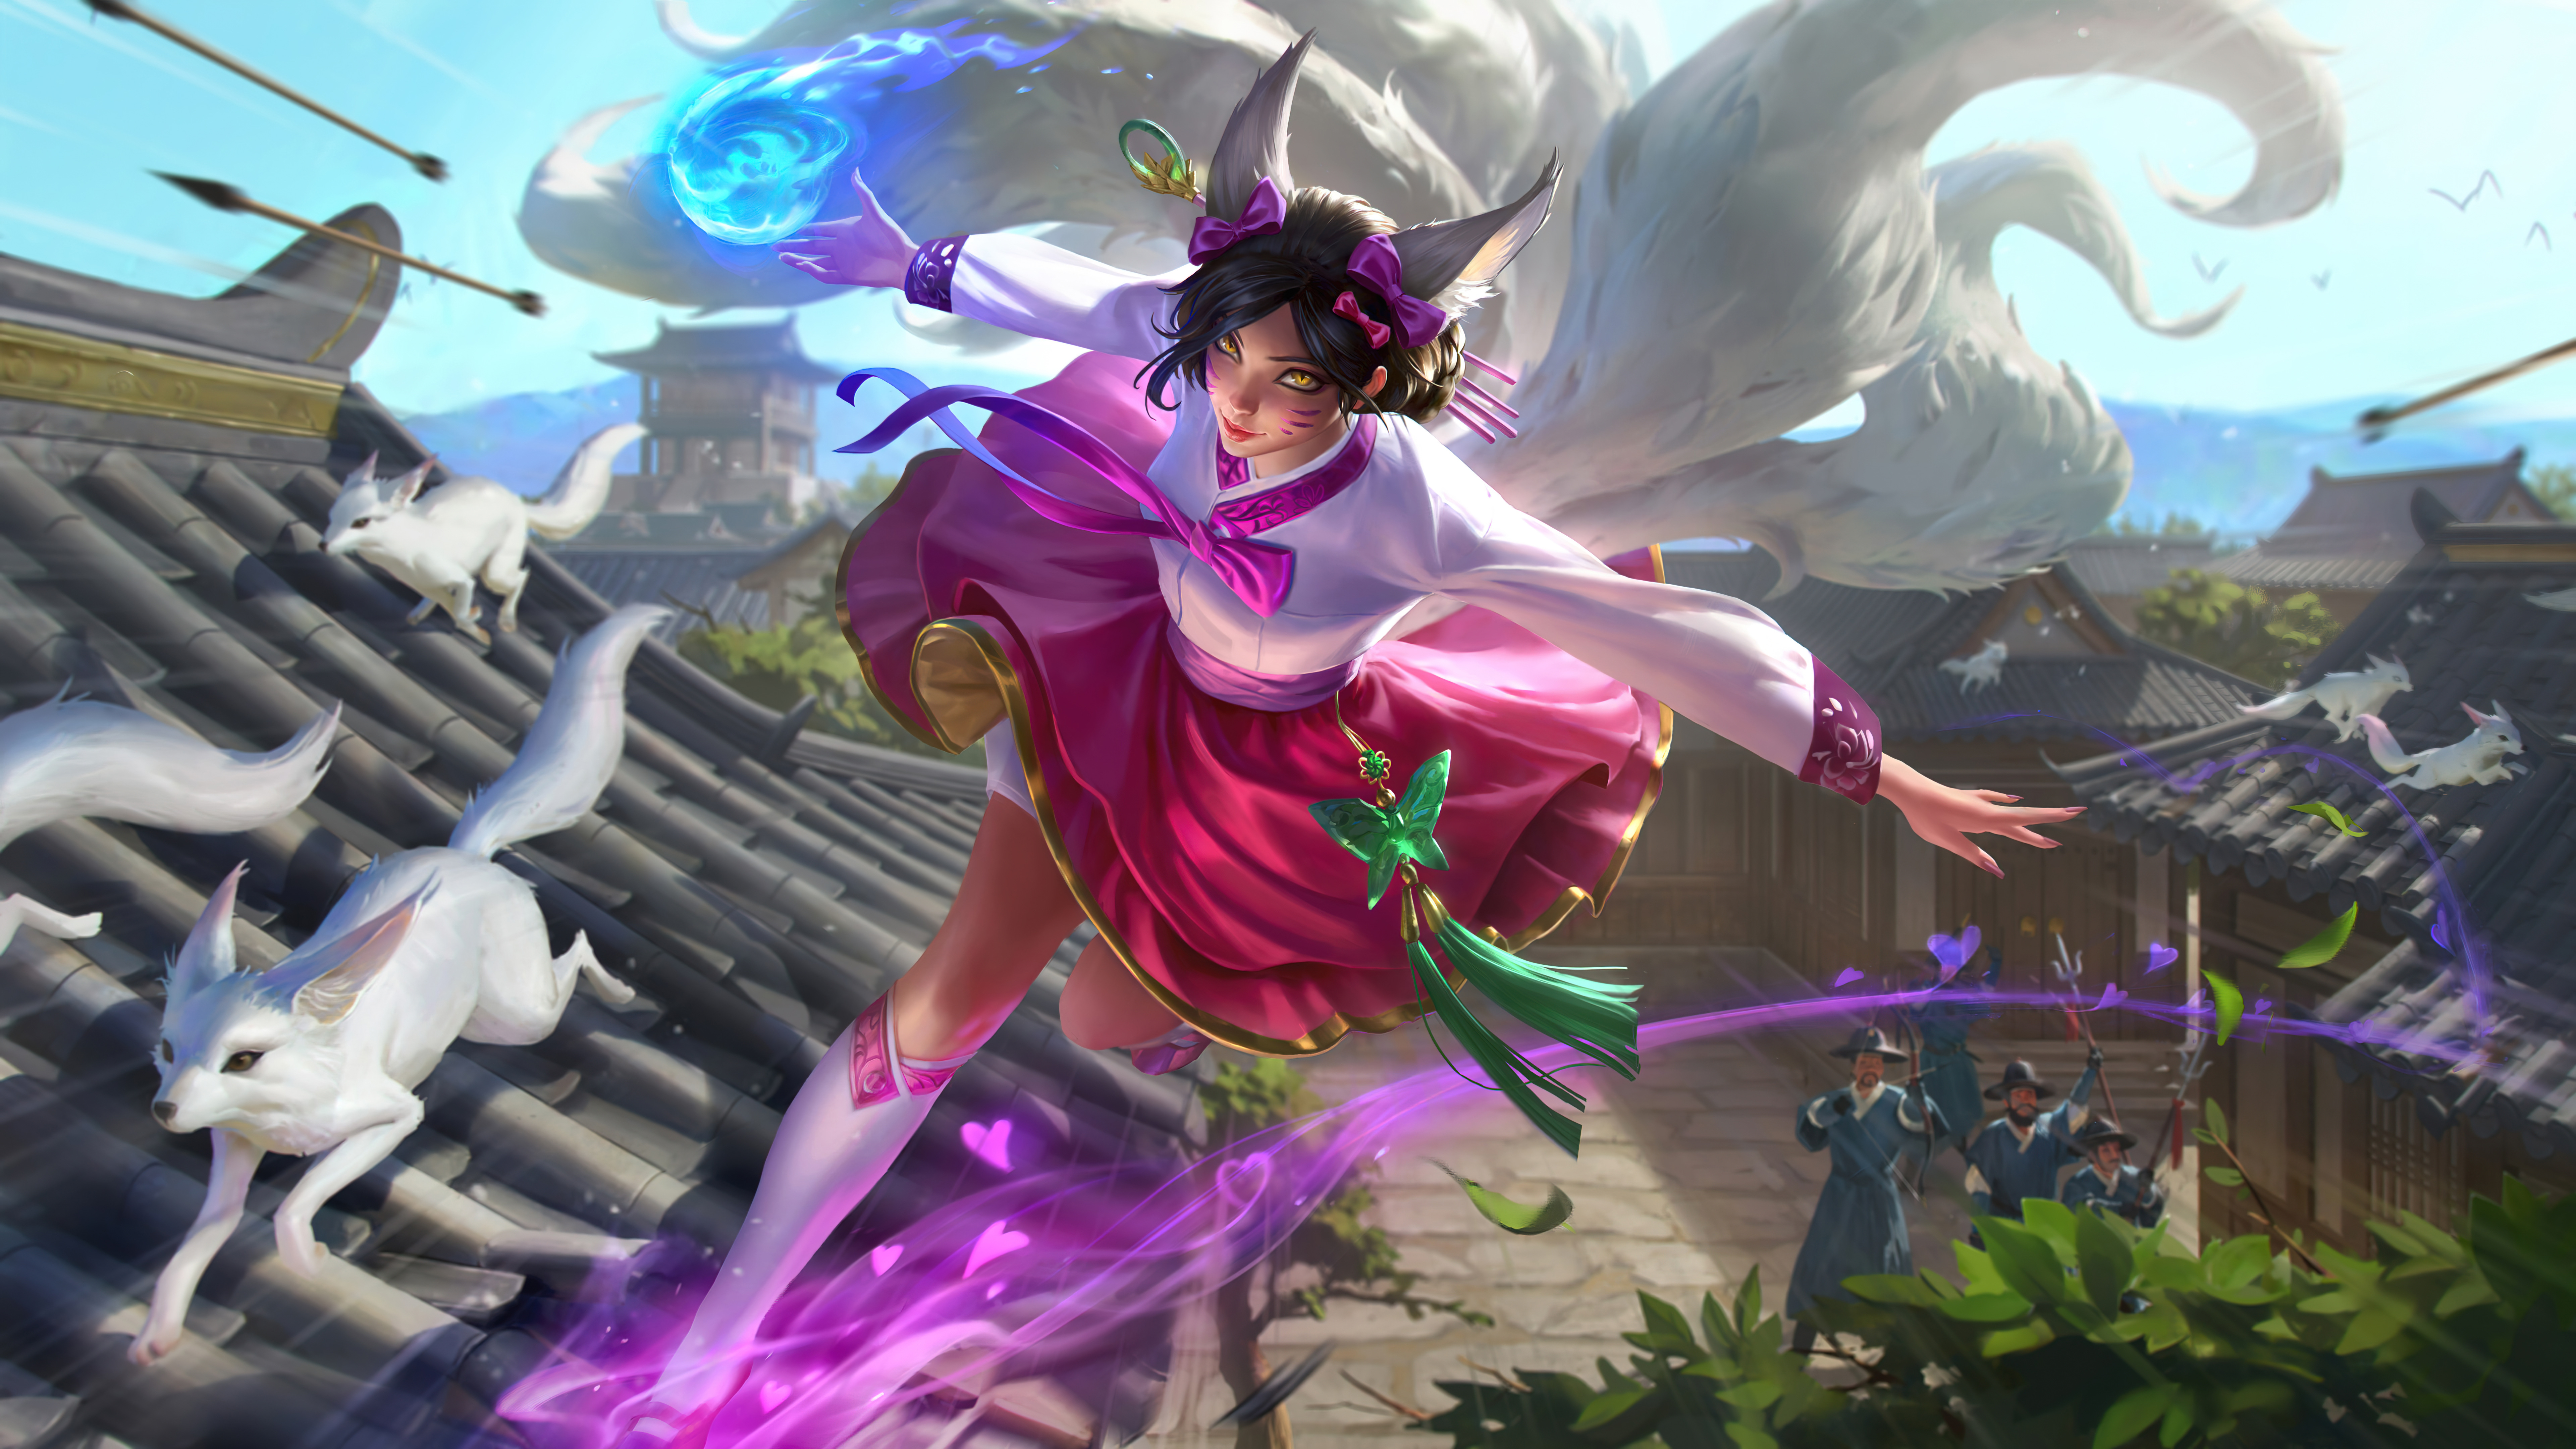 General 7680x4320 Ahri (League of Legends) video games GZG 4K Riot Games digital art League of Legends video game characters fox girl fox